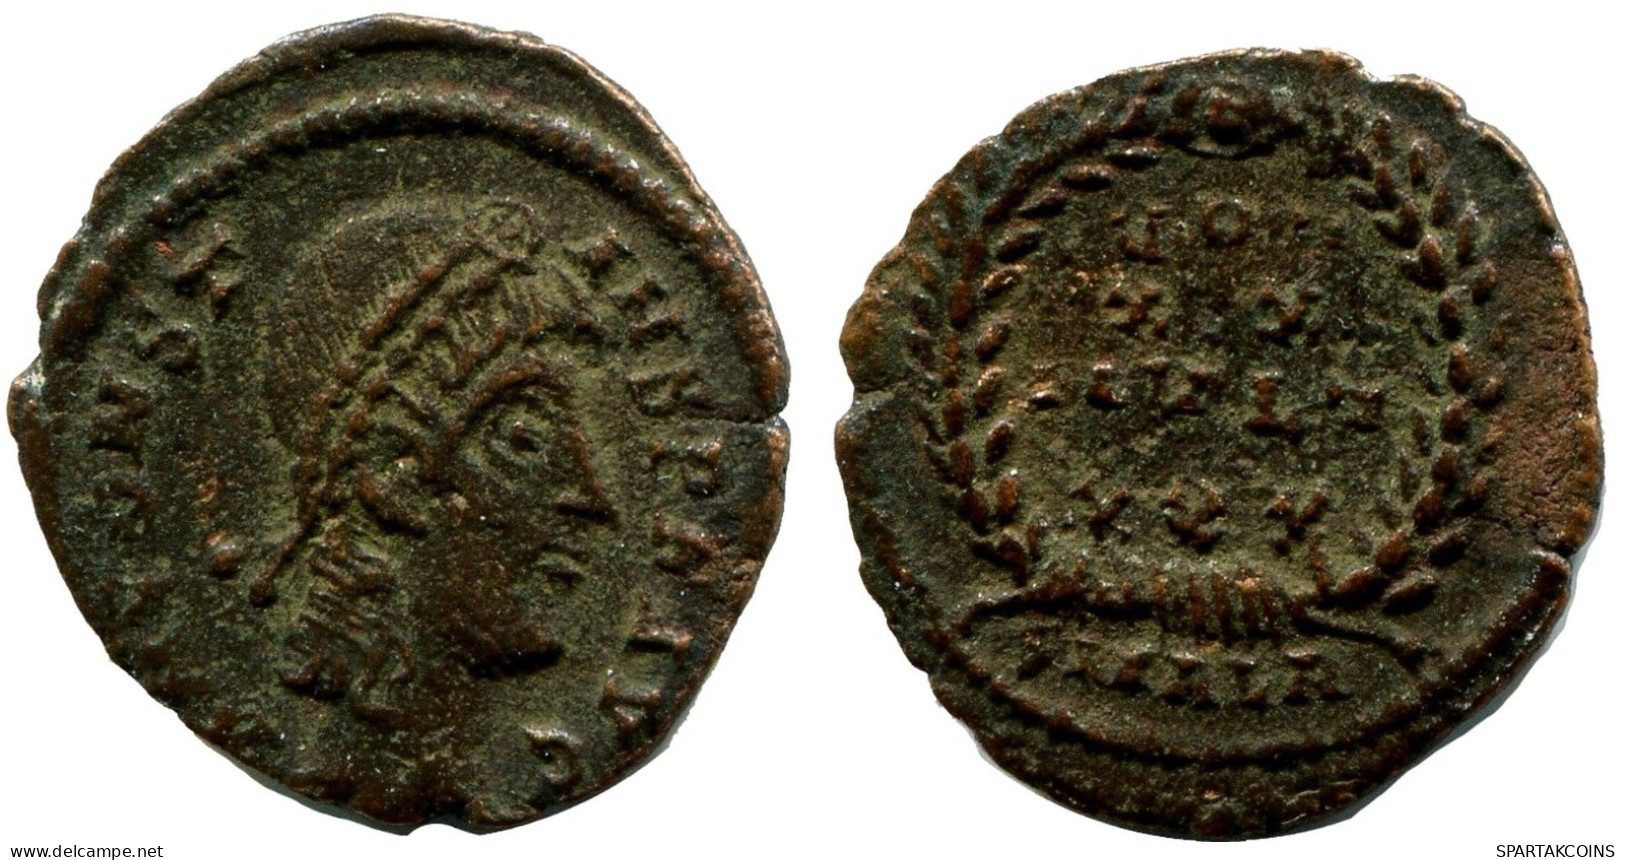 CONSTANS MINTED IN ALEKSANDRIA FROM THE ROYAL ONTARIO MUSEUM #ANC11465.14.U.A - L'Empire Chrétien (307 à 363)